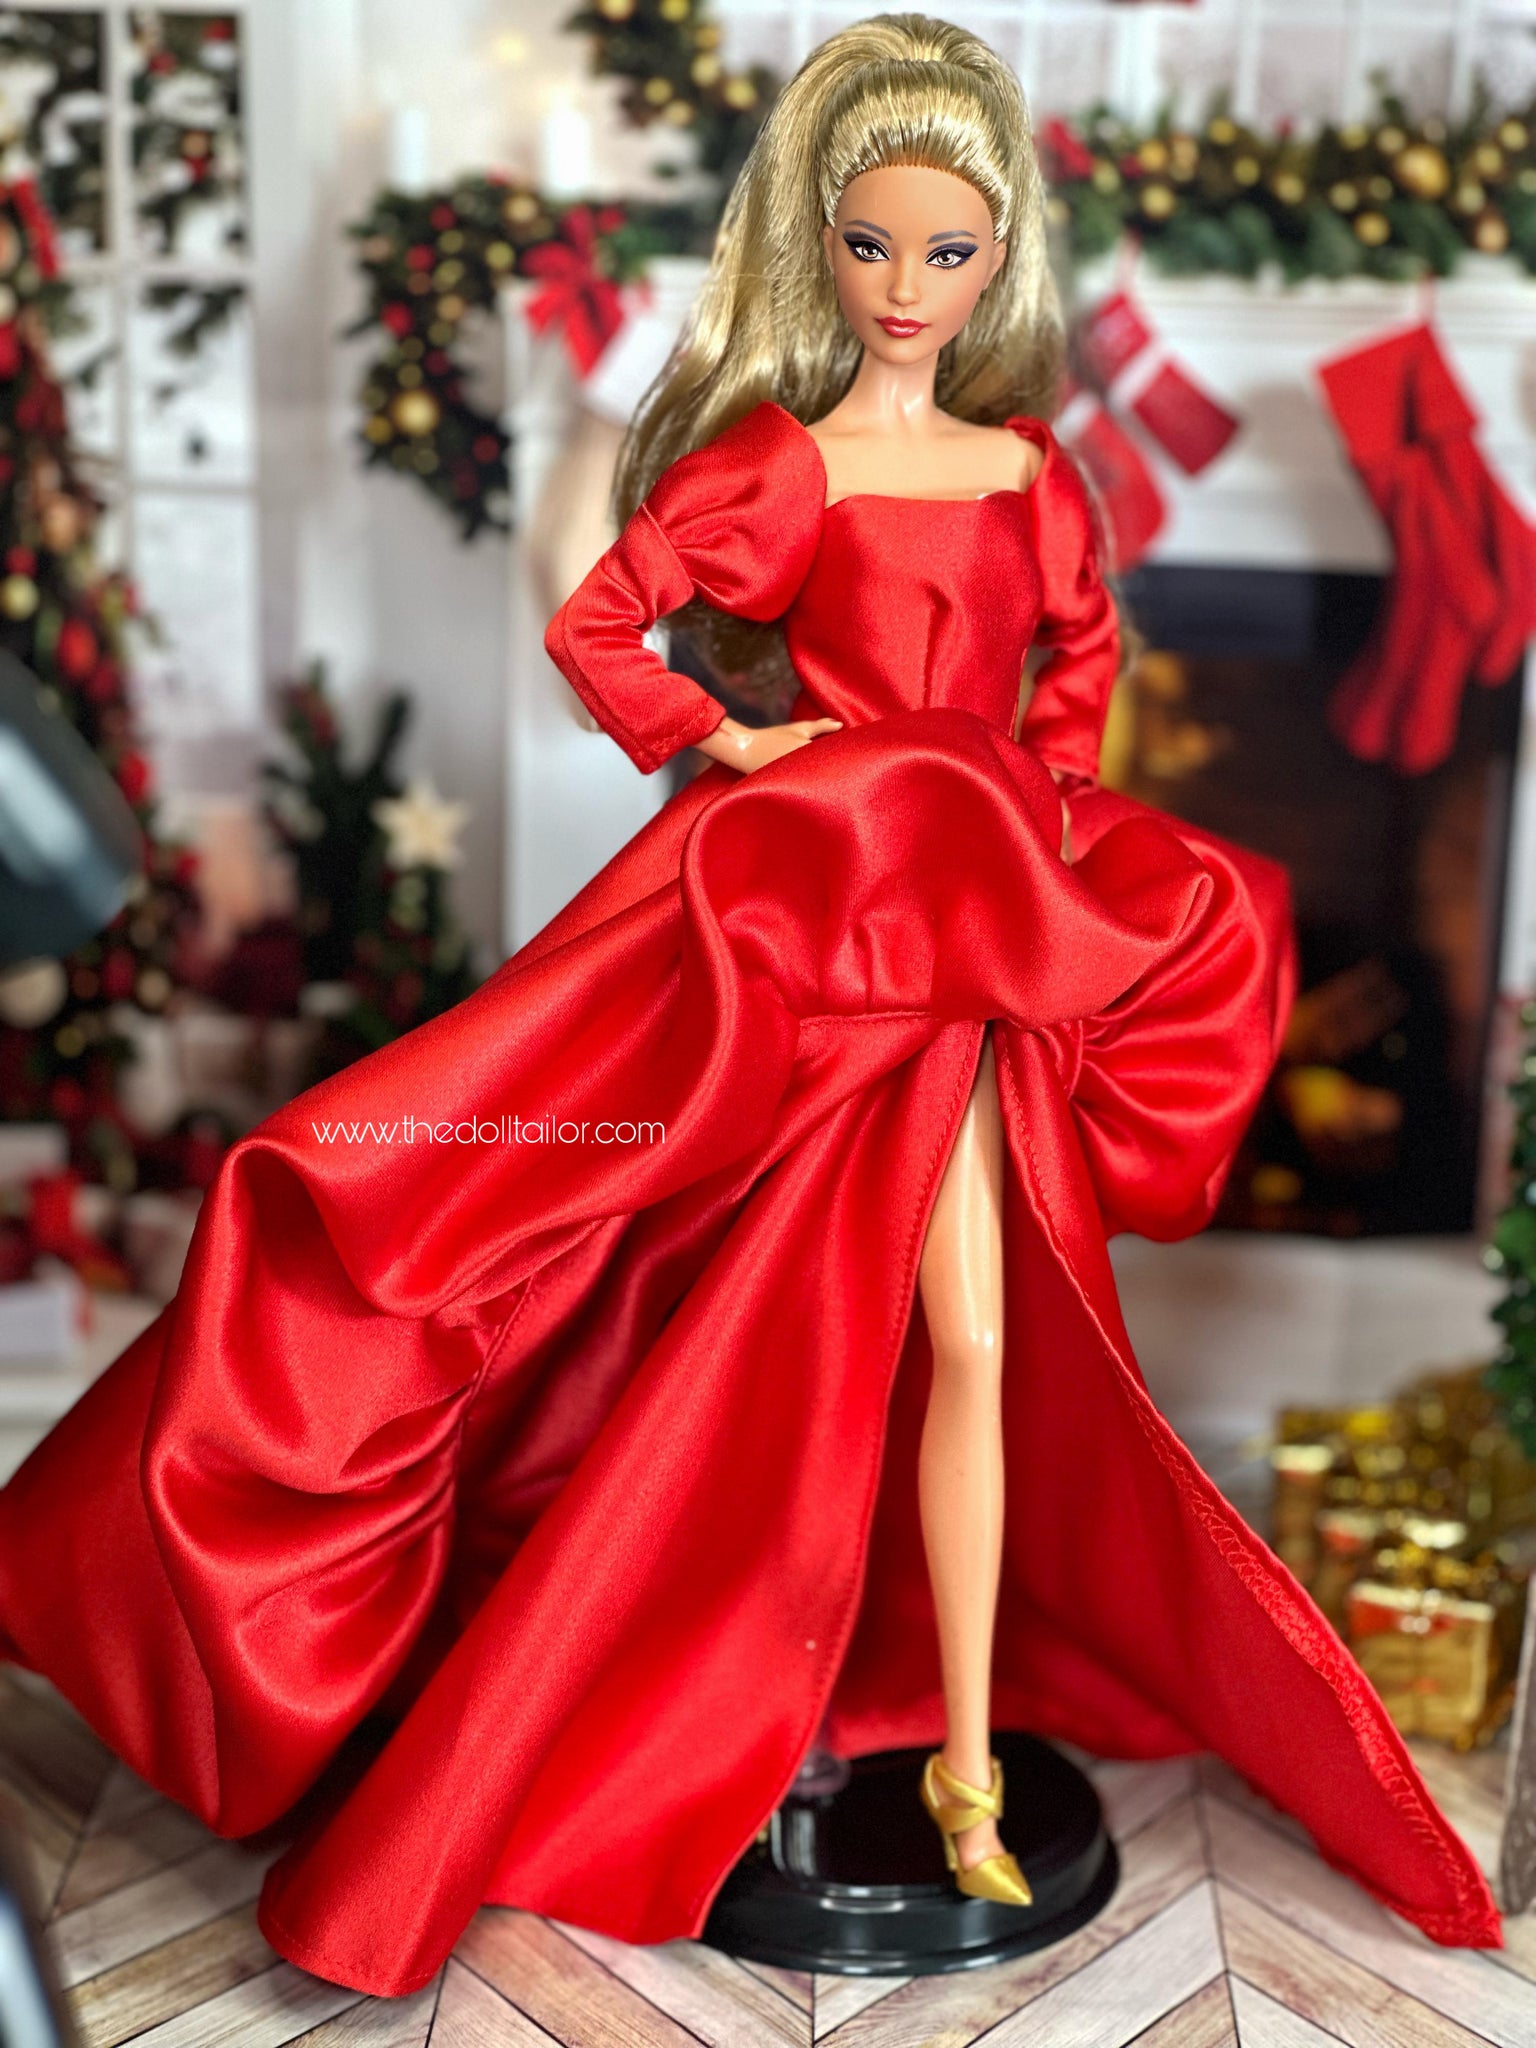 Red Short Dress Evening Gown For Barbie Doll Outfits 1/6 Doll Accessories  Toy | eBay